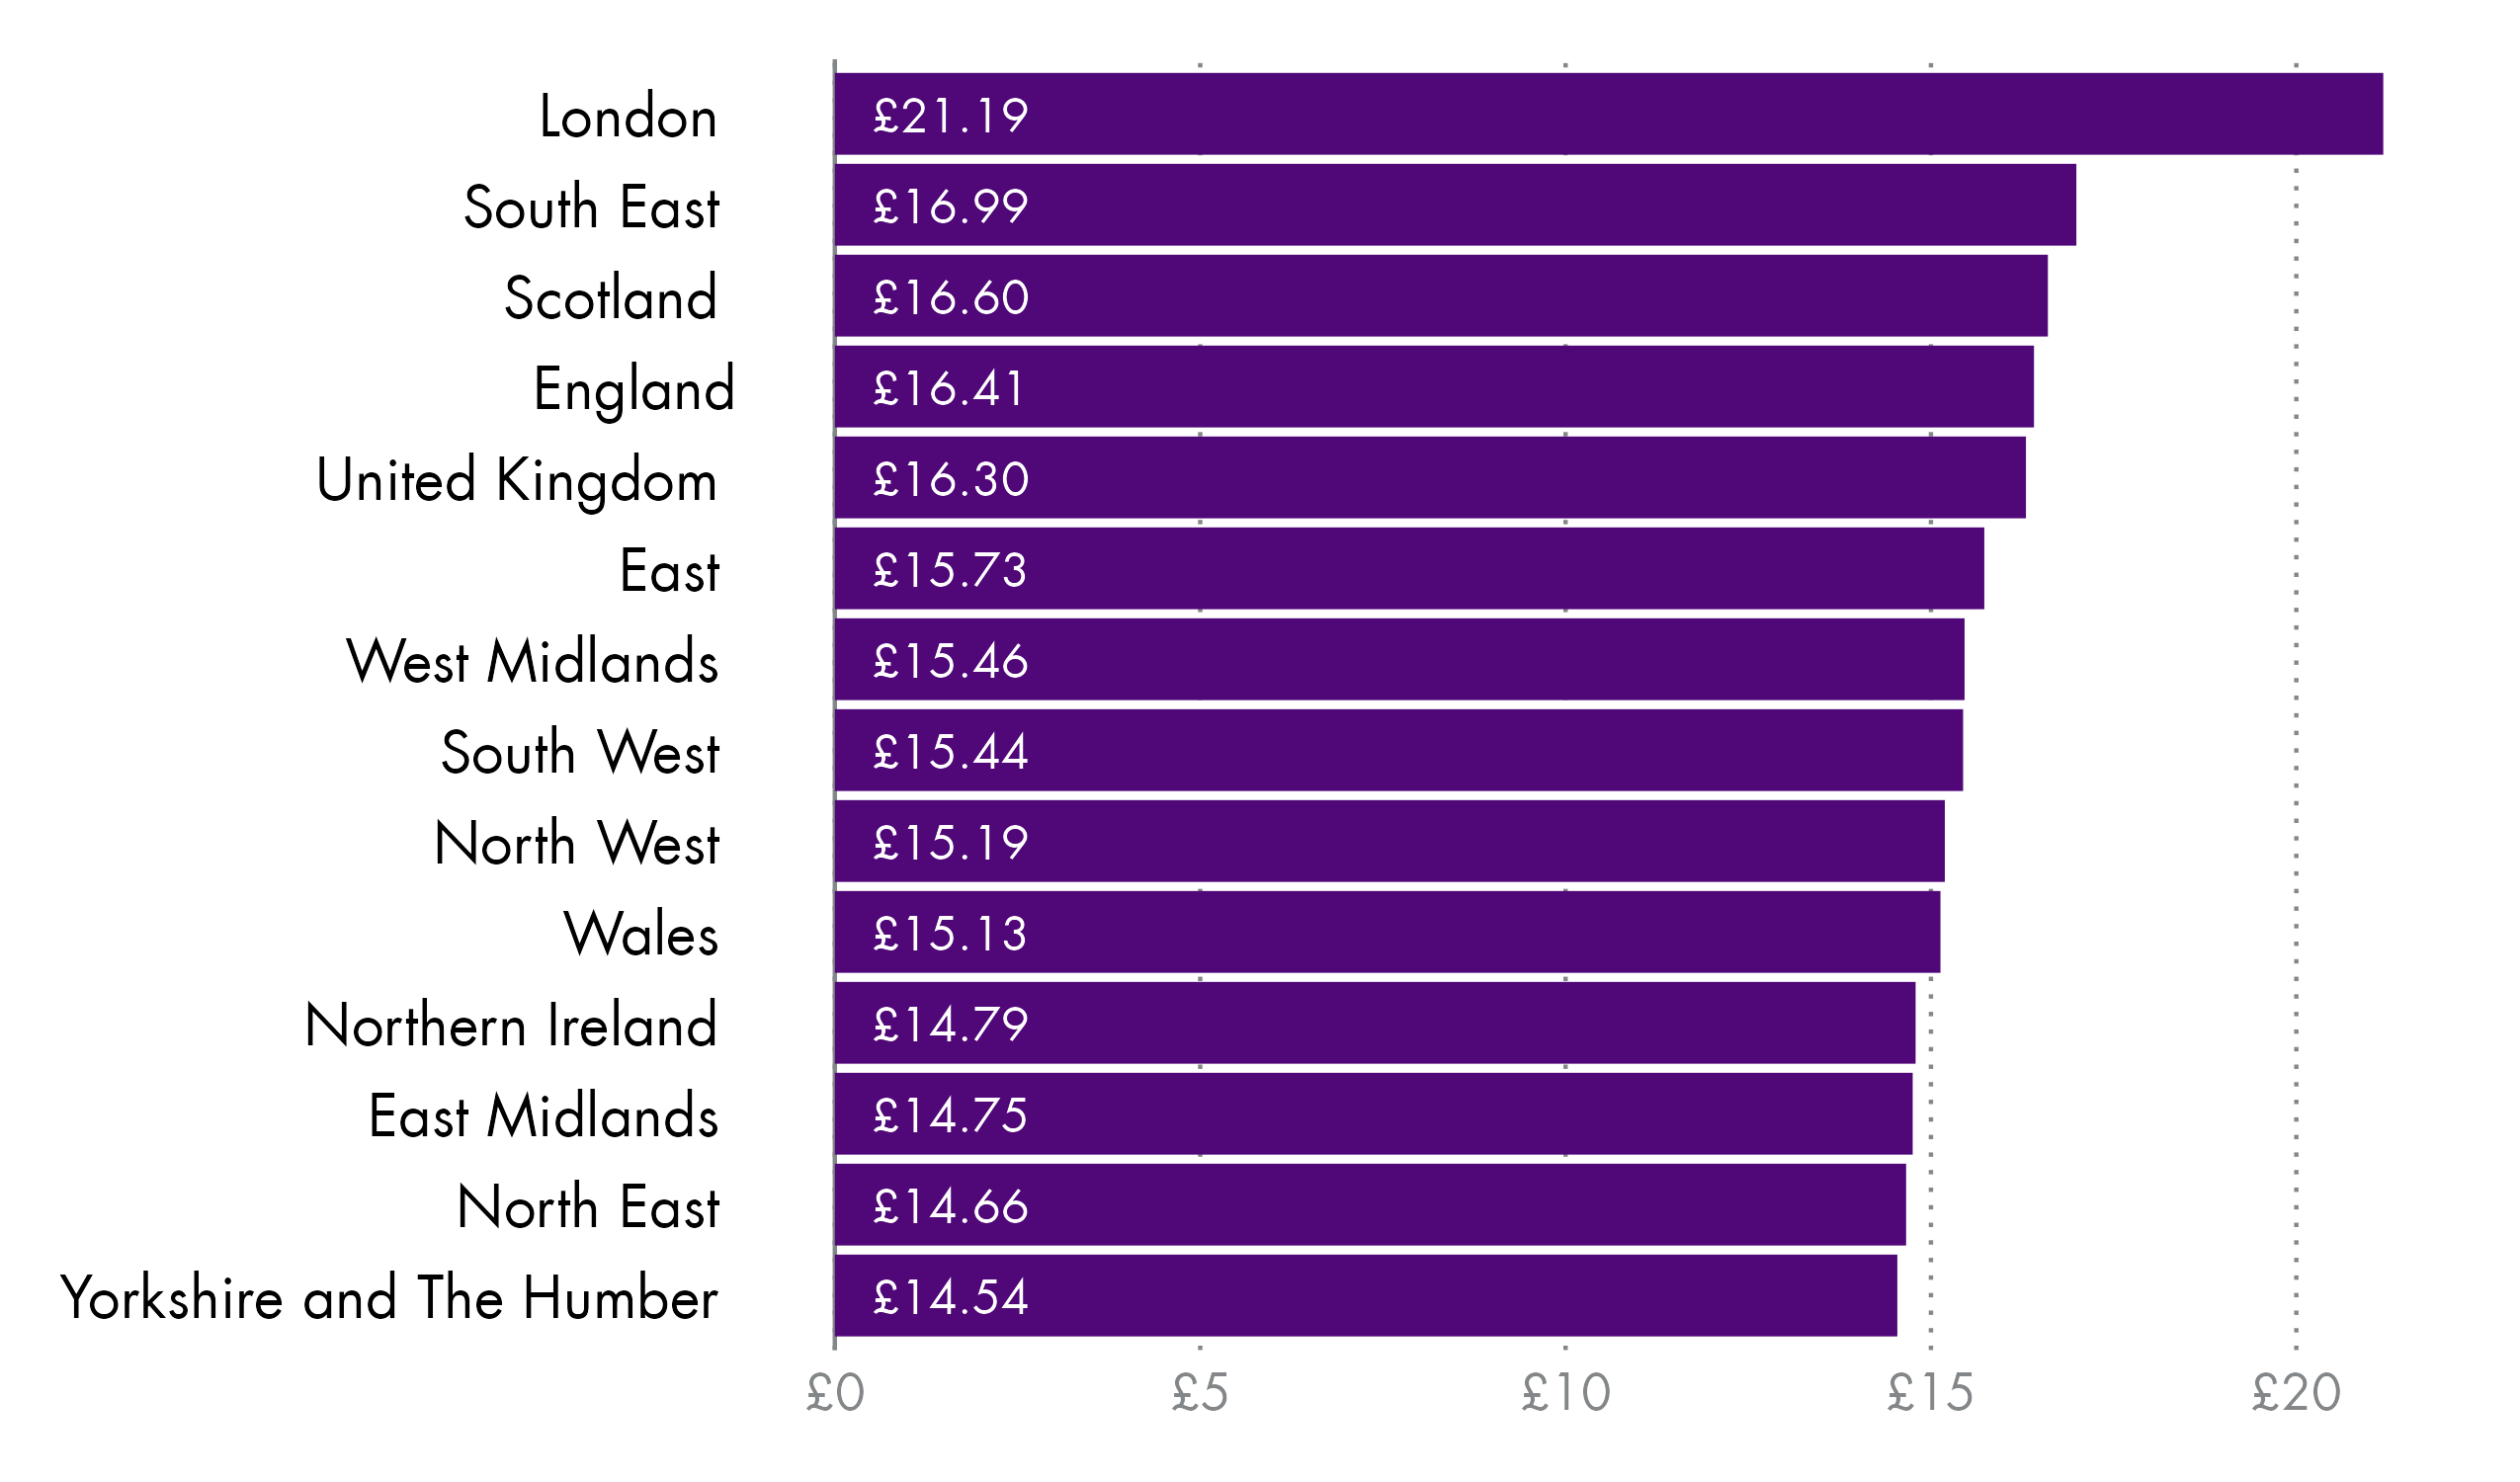 A horizontal bar chart showing the median hourly pay excluding overtime pay for full-time employees by nations and regions of the UK ranked from highest to lowest.